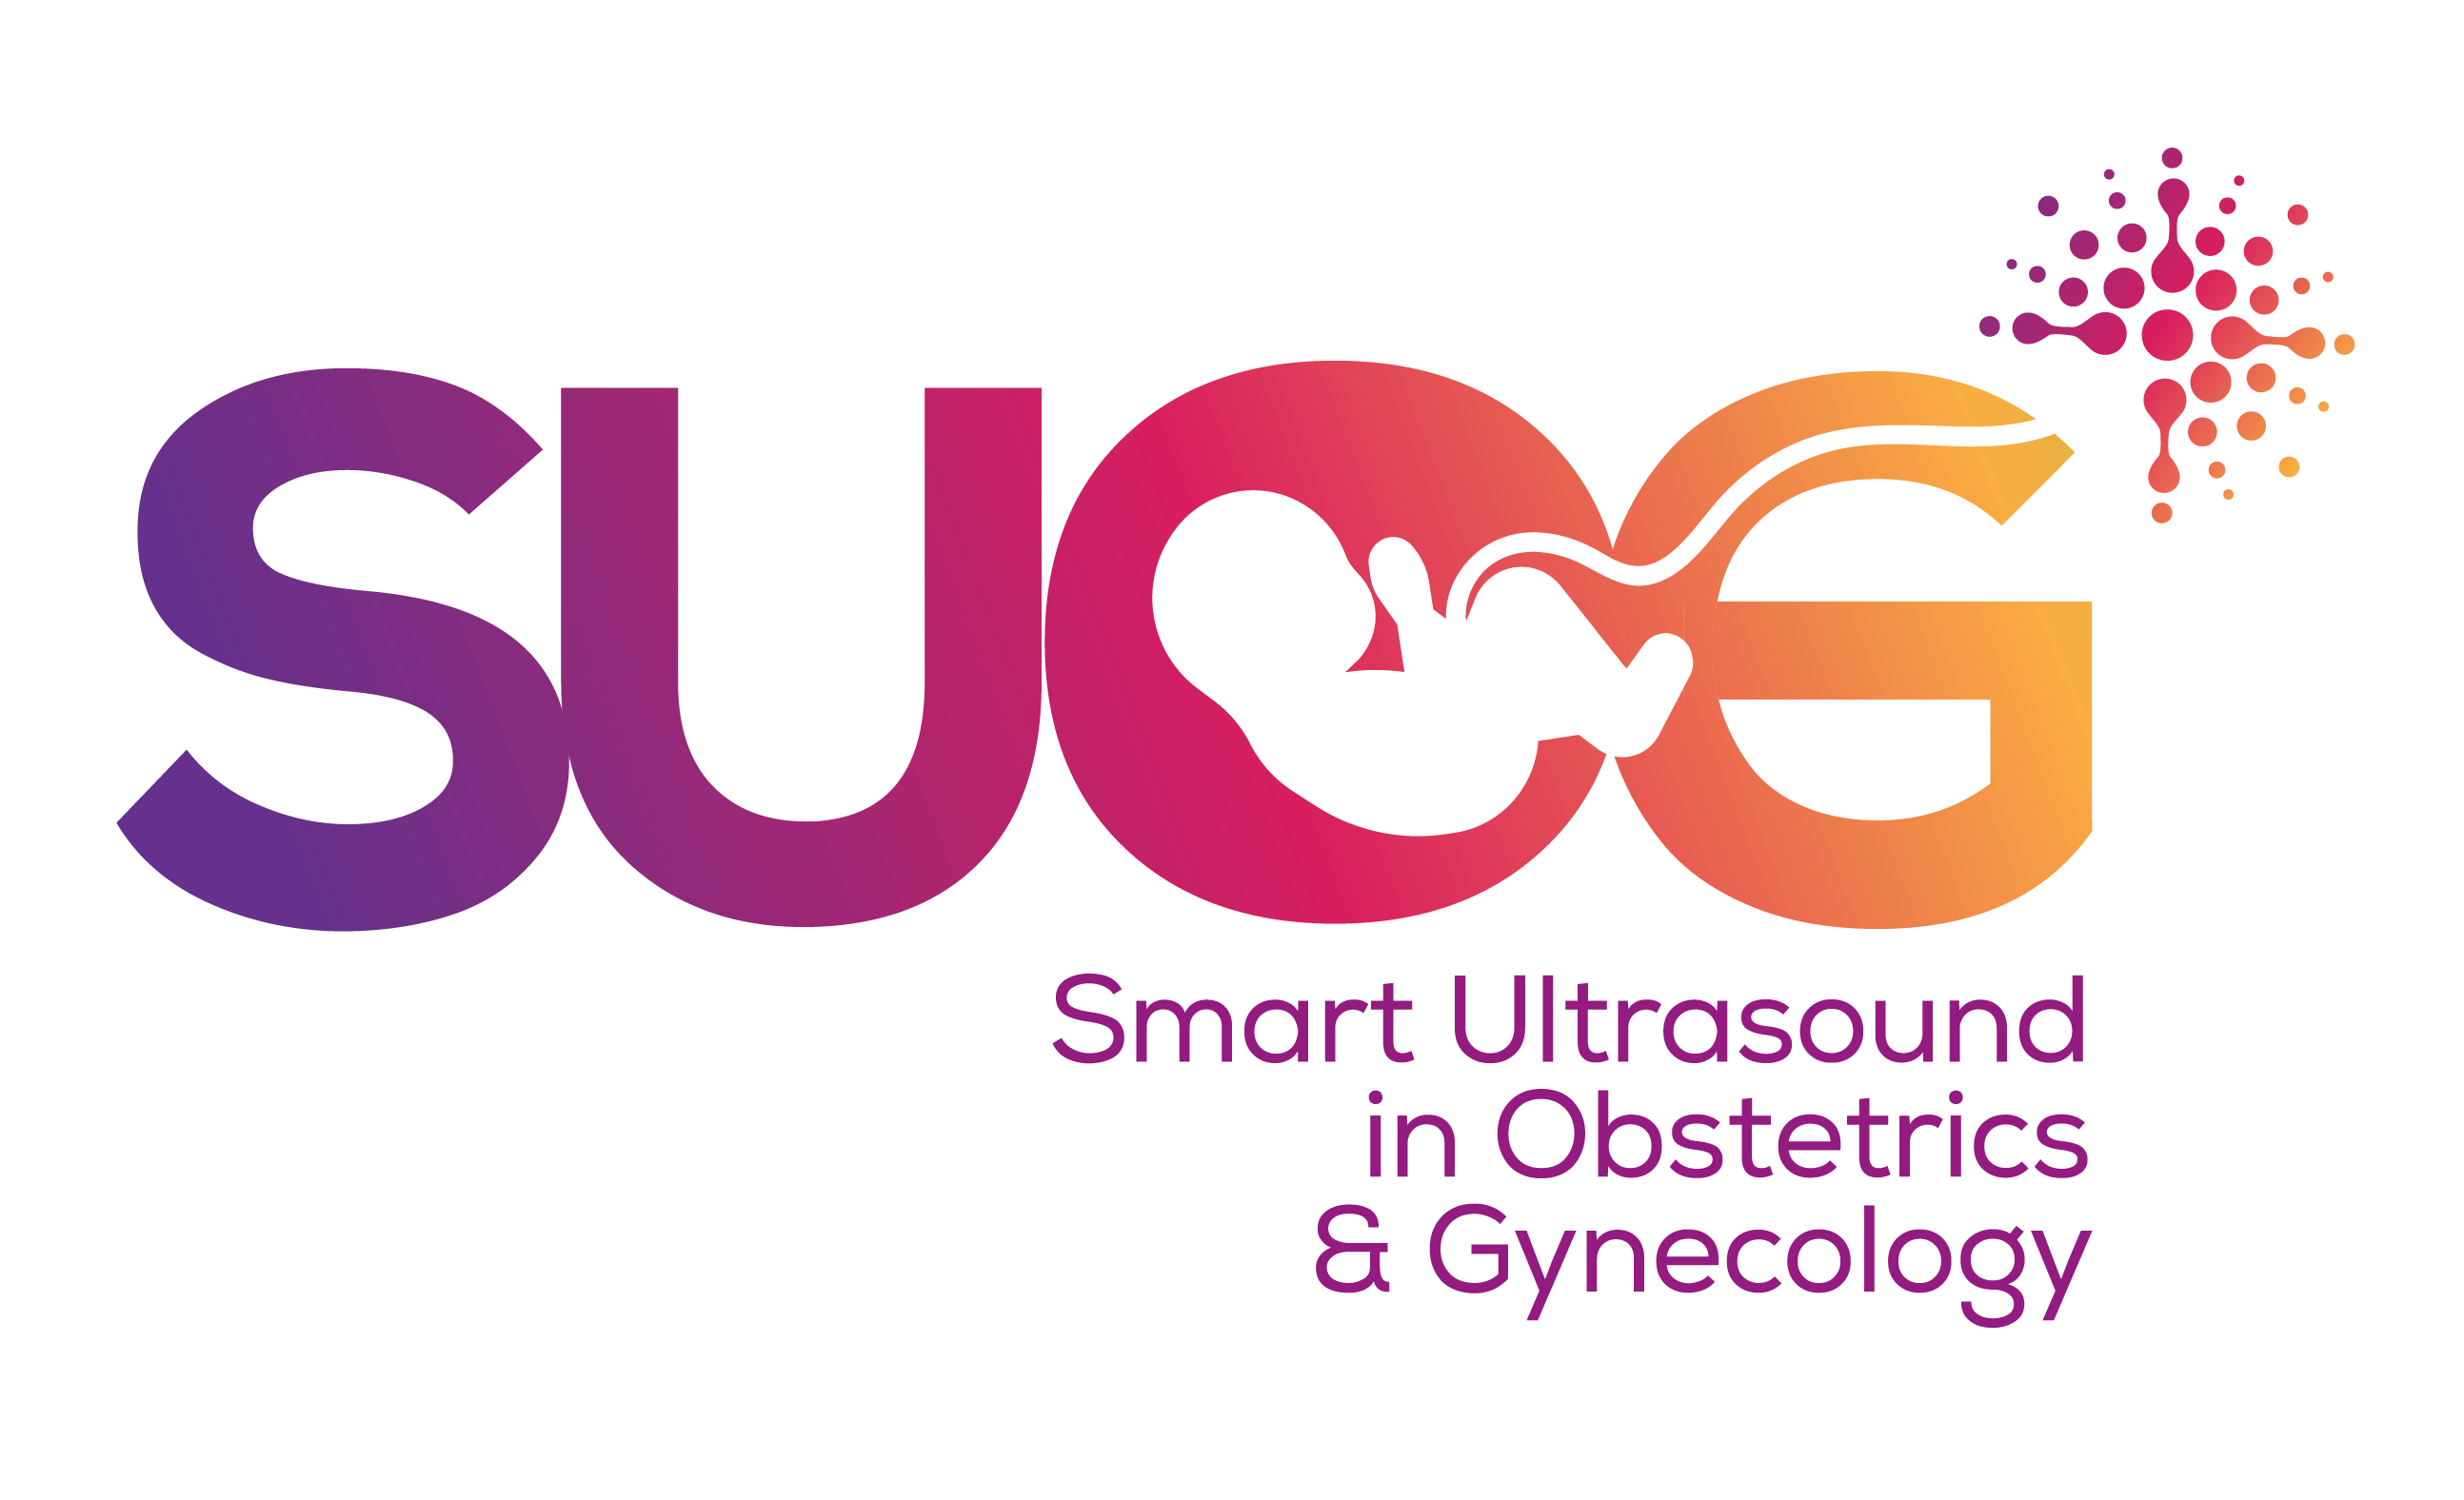 Smart Ultrasound in Obstetrics and Gynaecology (SUOG)